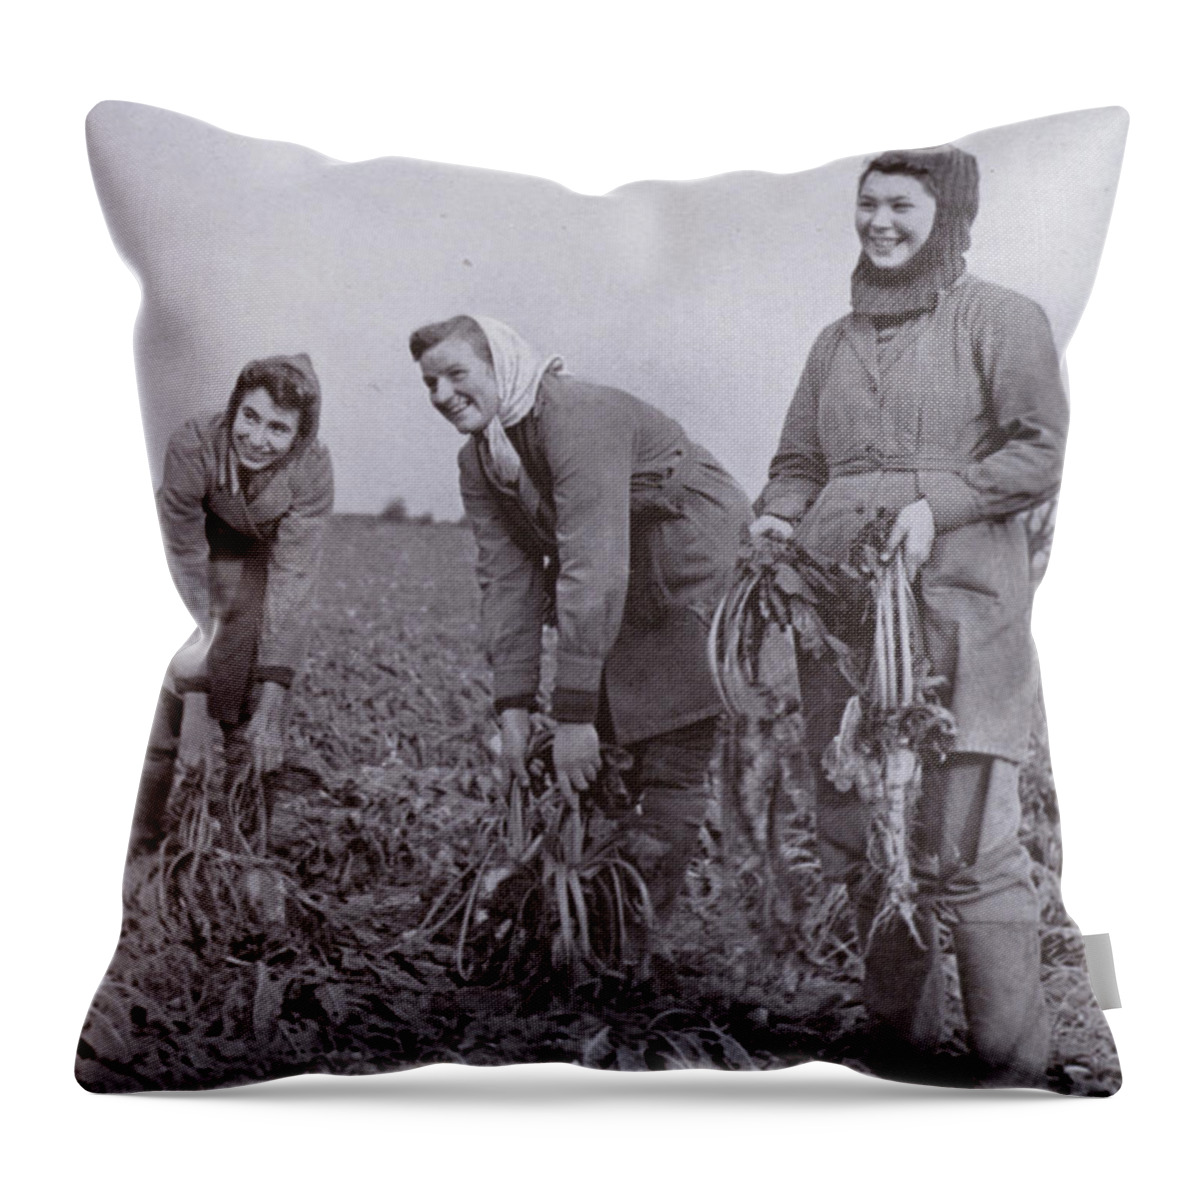 History Throw Pillow featuring the photograph The Womens Land Army In The Front Line, Sugar Beet Lifting by Harold Burdekin